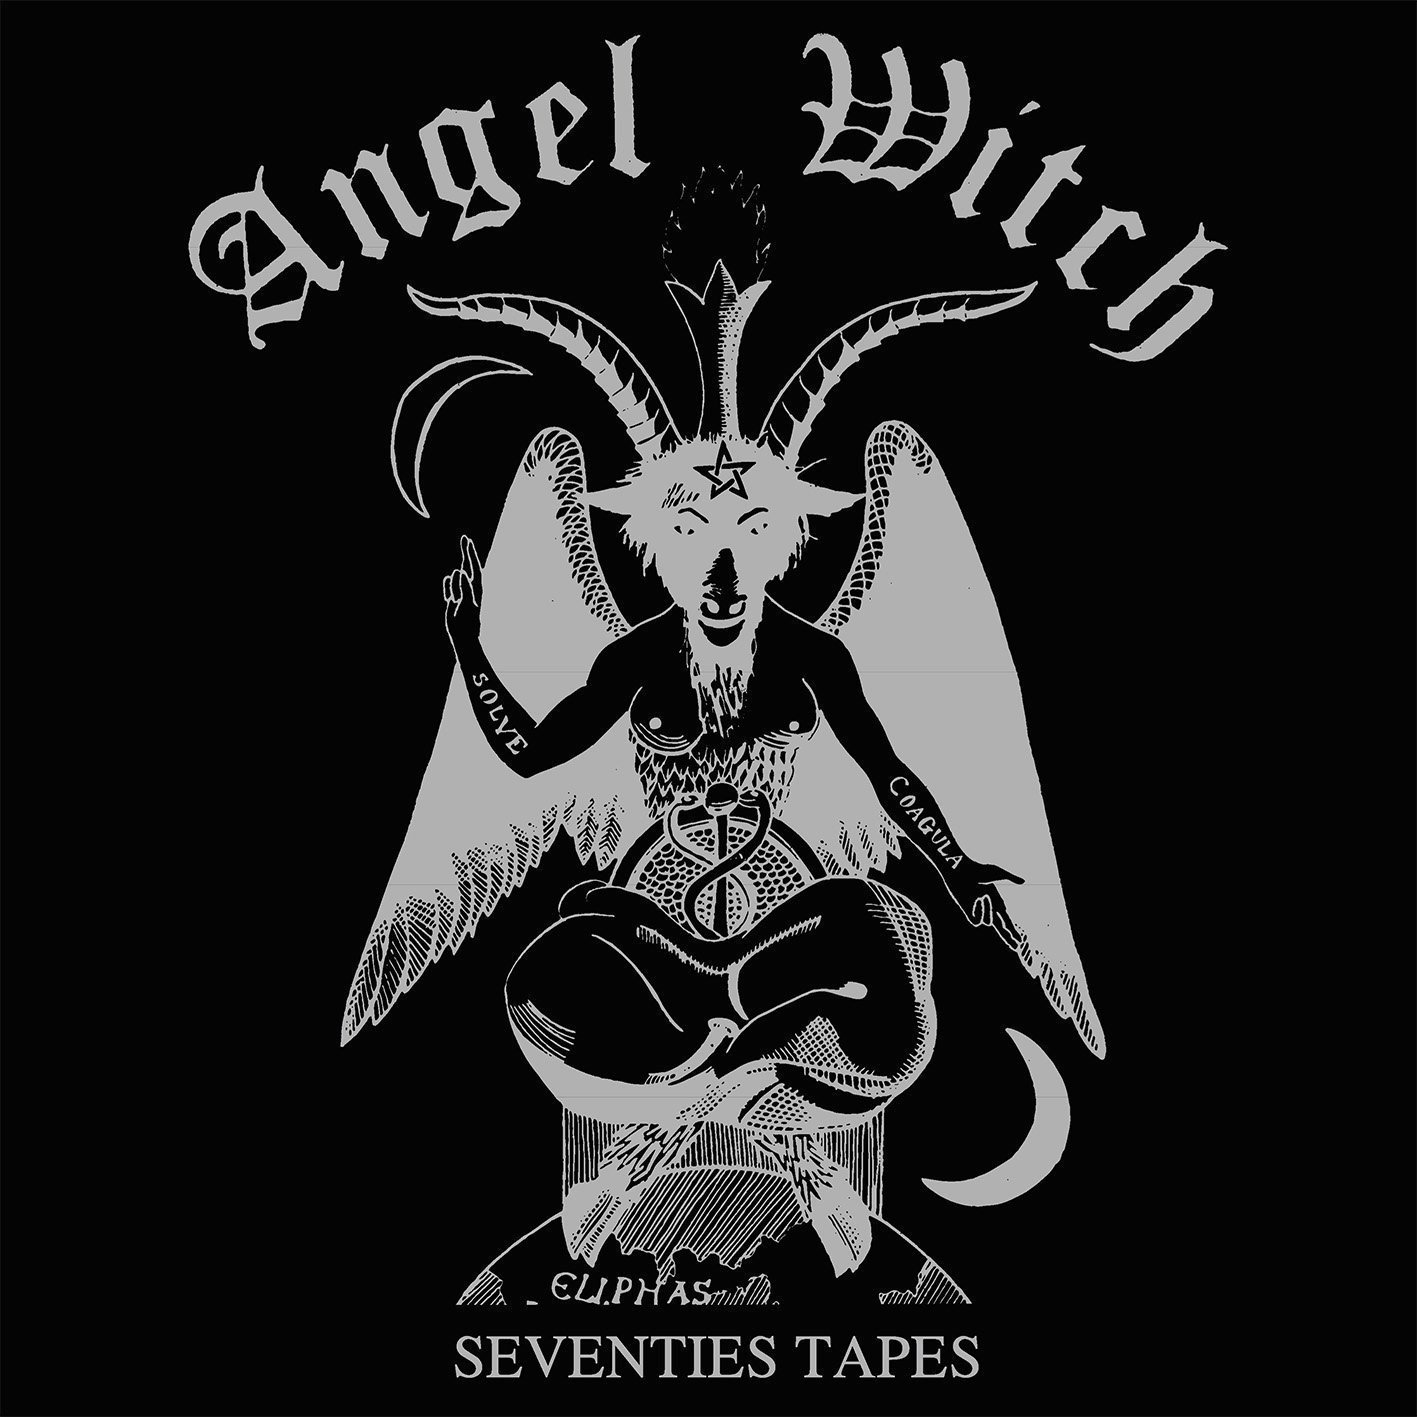 Vinyl Record Angel Witch - Seventies Tapes (LP)